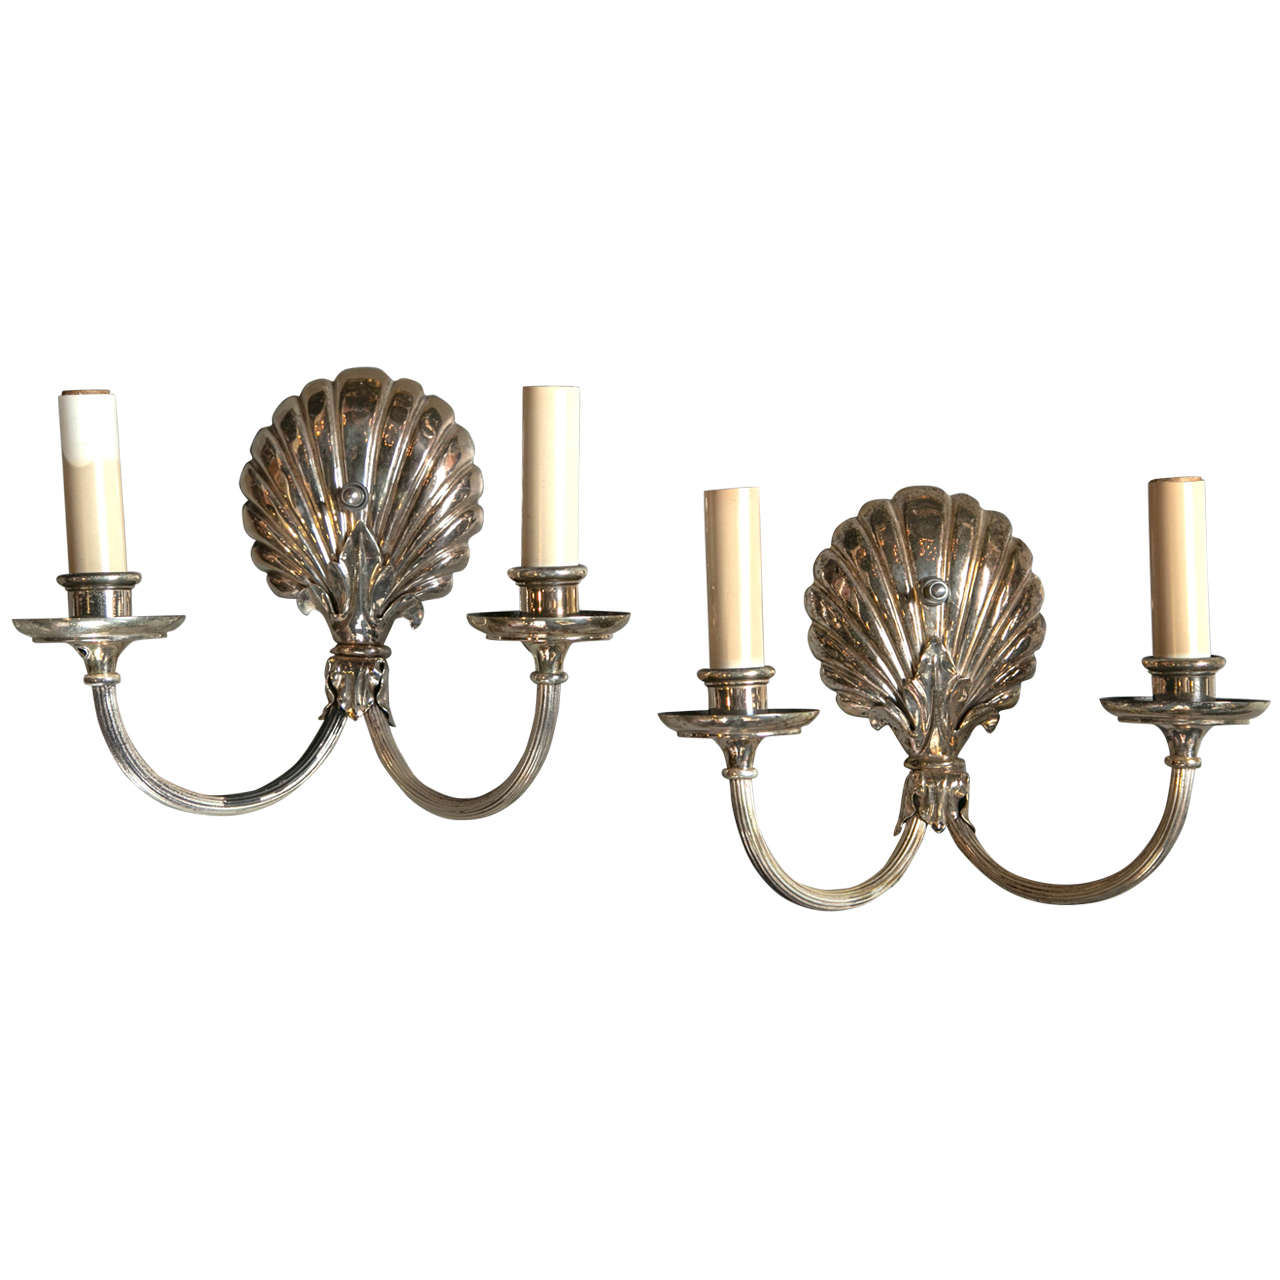 Set of 2 French Shell-Form Sconces, circa 1930s For Sale